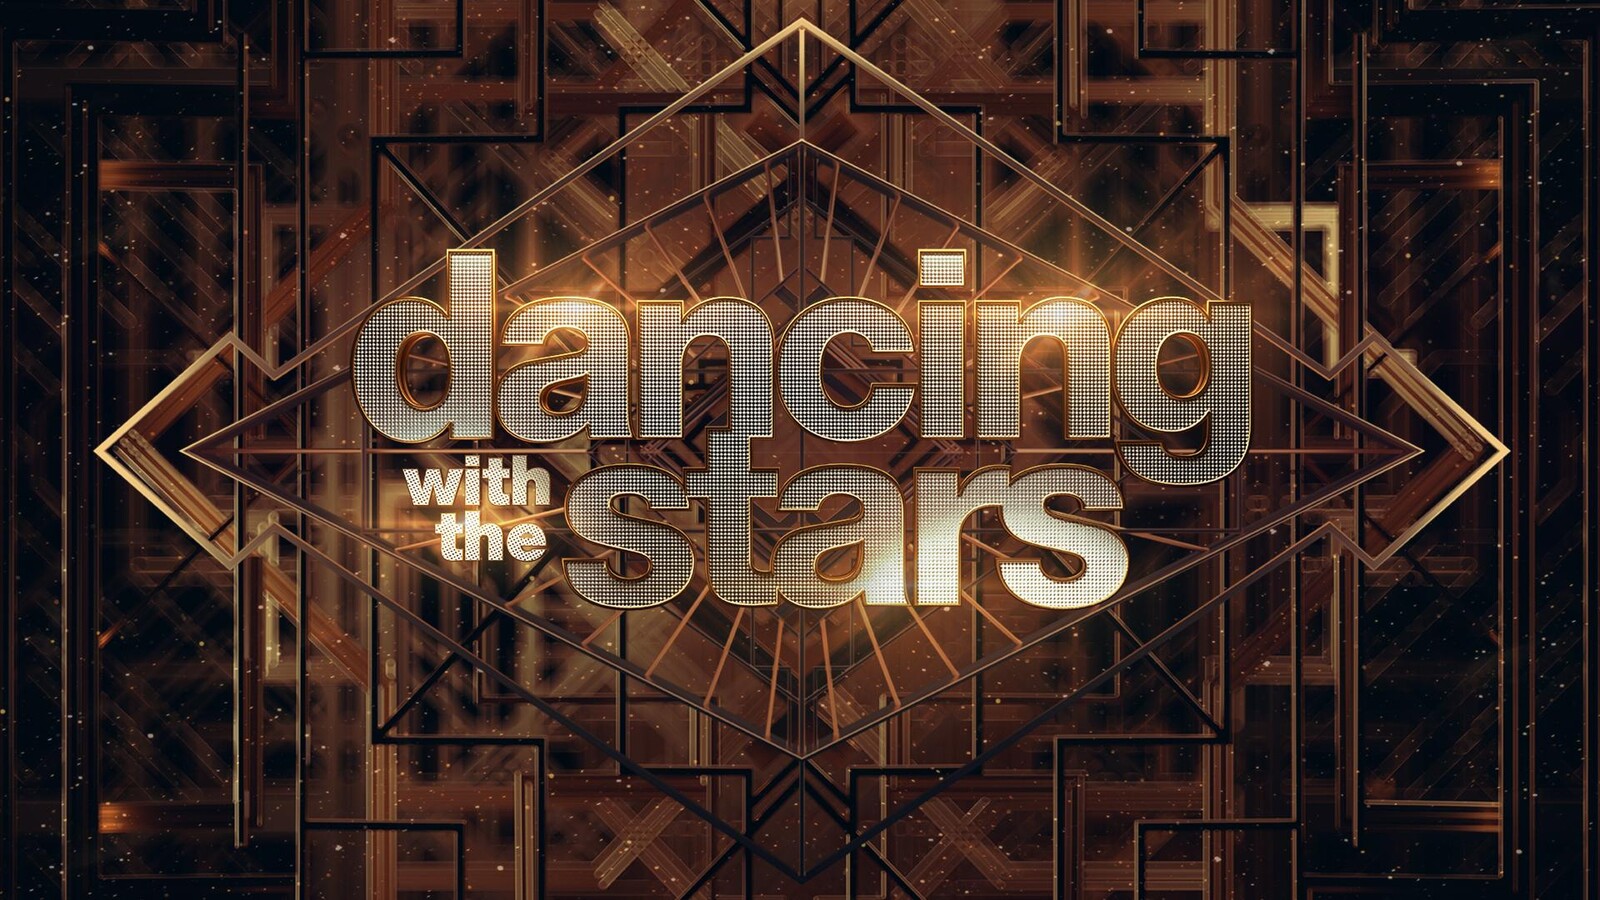 About Dancing with the Stars TV Show Series